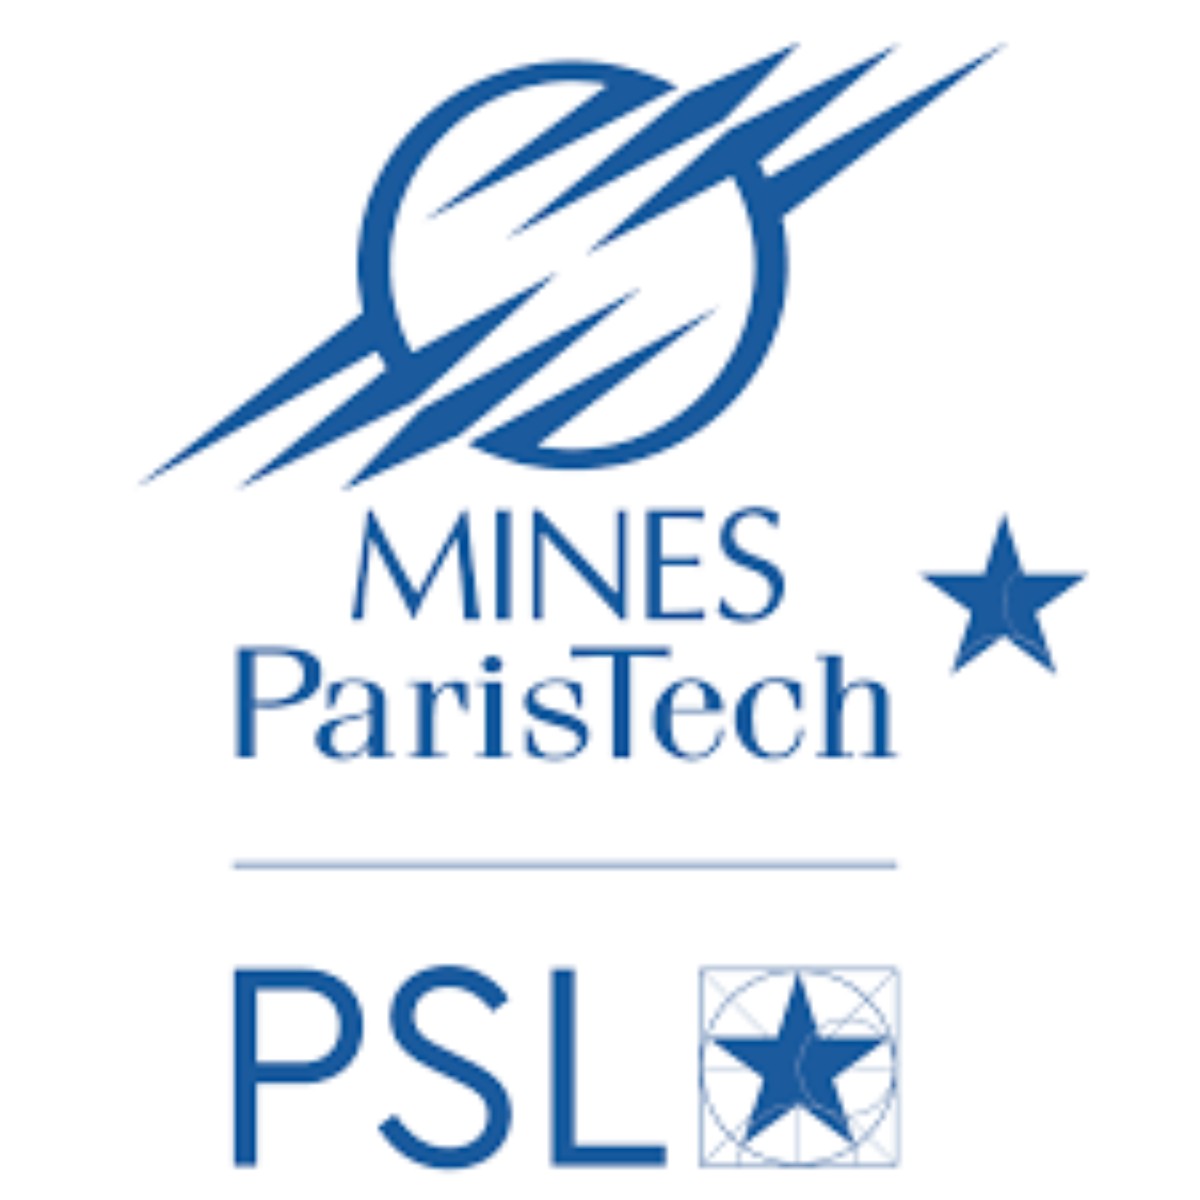 MINES ParisTech-CEMEF 2023 Research Fellowships in France